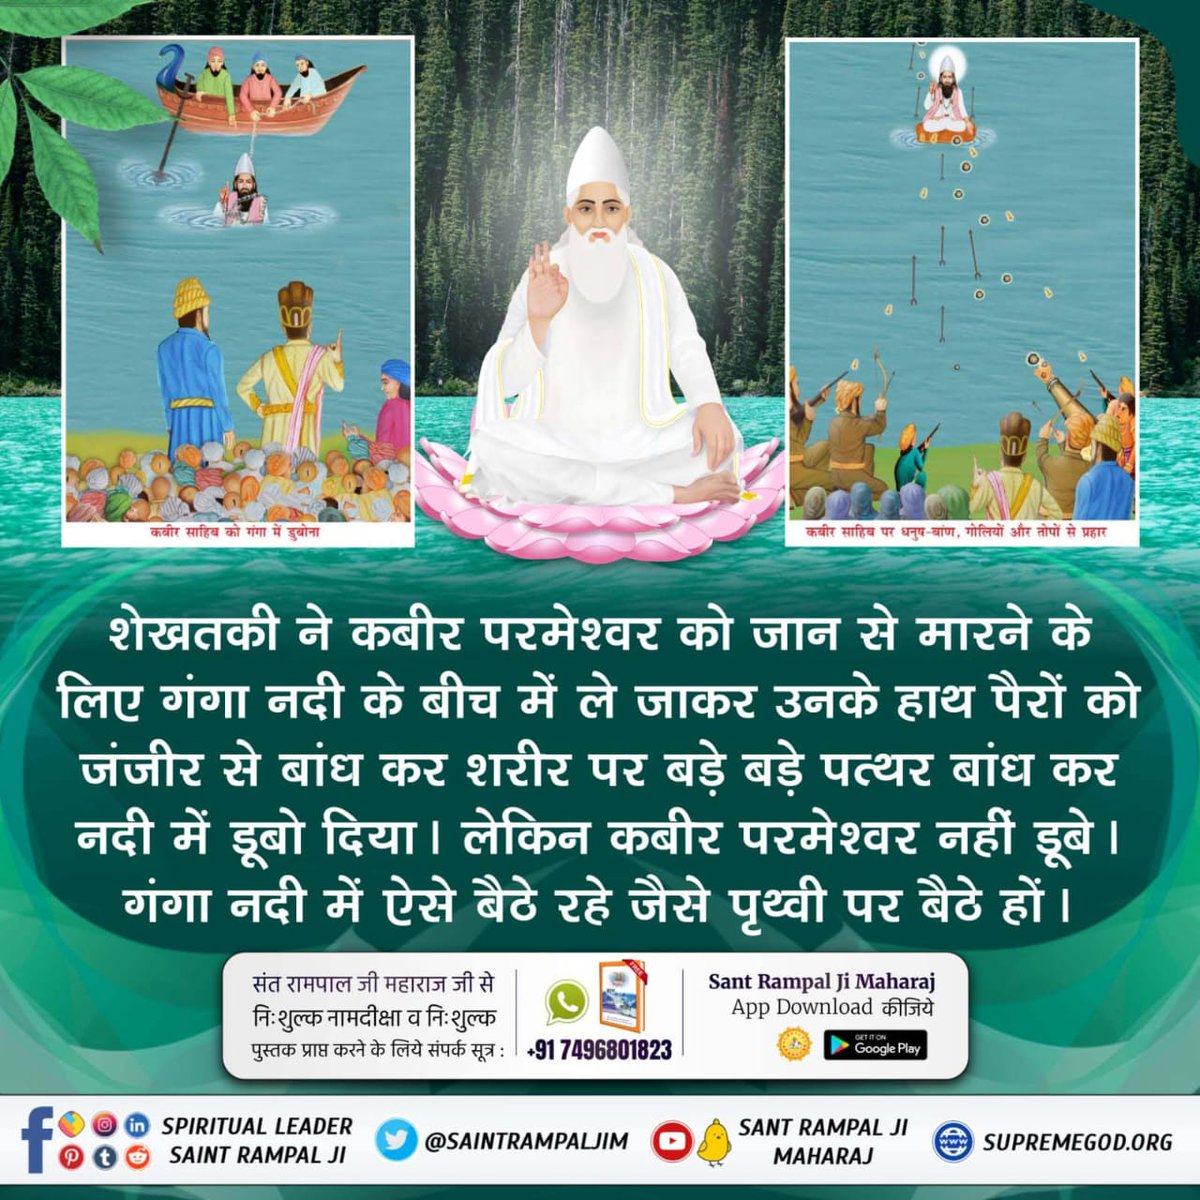 #कबीर_भगवान_के_चमत्कार
Sheikhtaki made a strategy to kil LordKabir by decapitating His head using a chakra.Then one ay on the order of Sheikhtaki the chakra bearer attacked on LordKabir using the chakra but the chakra decapitated the head of chakra bearer only
GodKabirPrakatDiwas